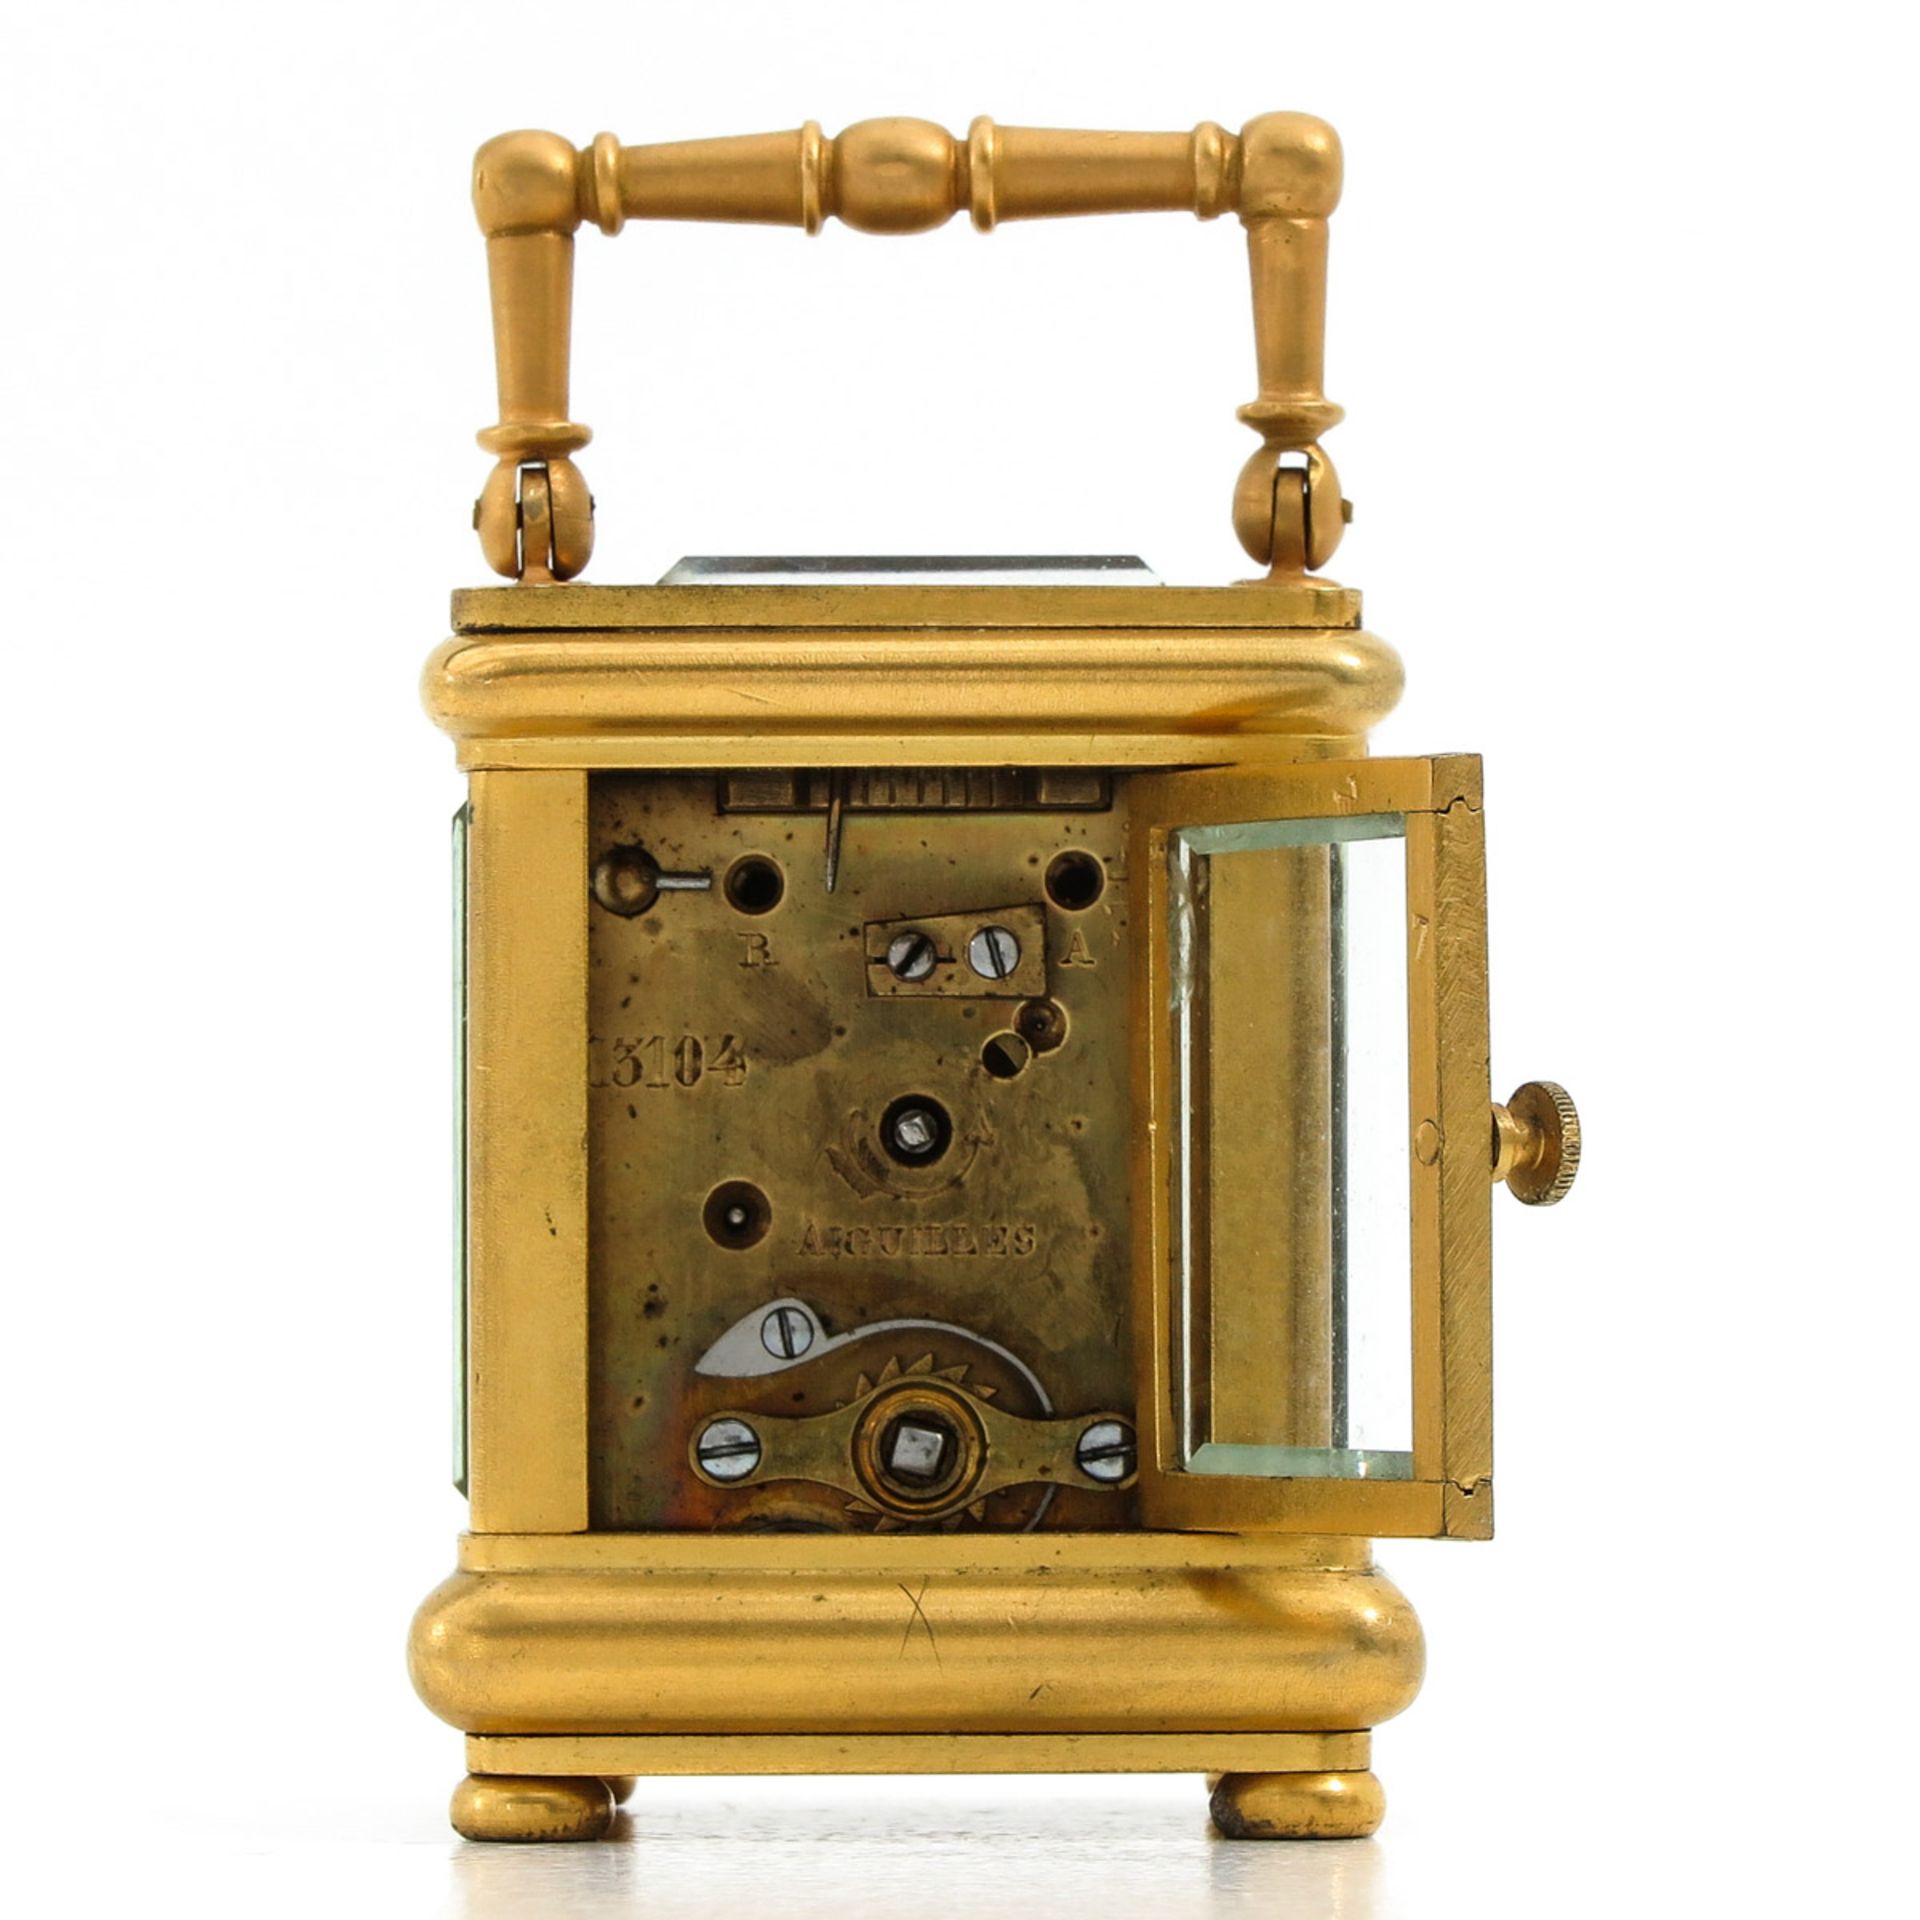 A Le Roy & Fils Carriage Clock - Image 3 of 8